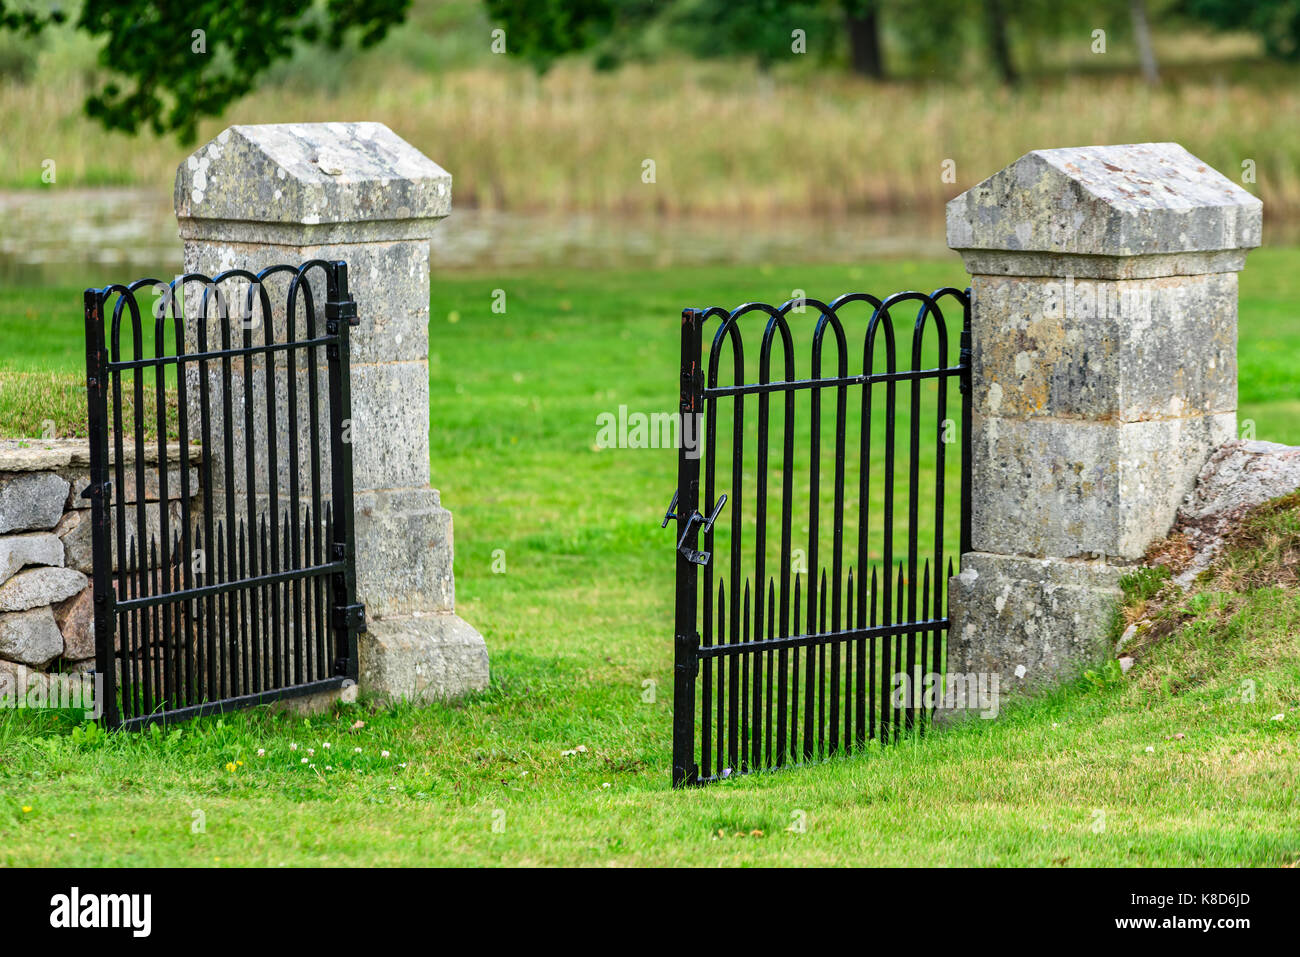 Open black iron gate sided by two stone pillars. Stock Photo